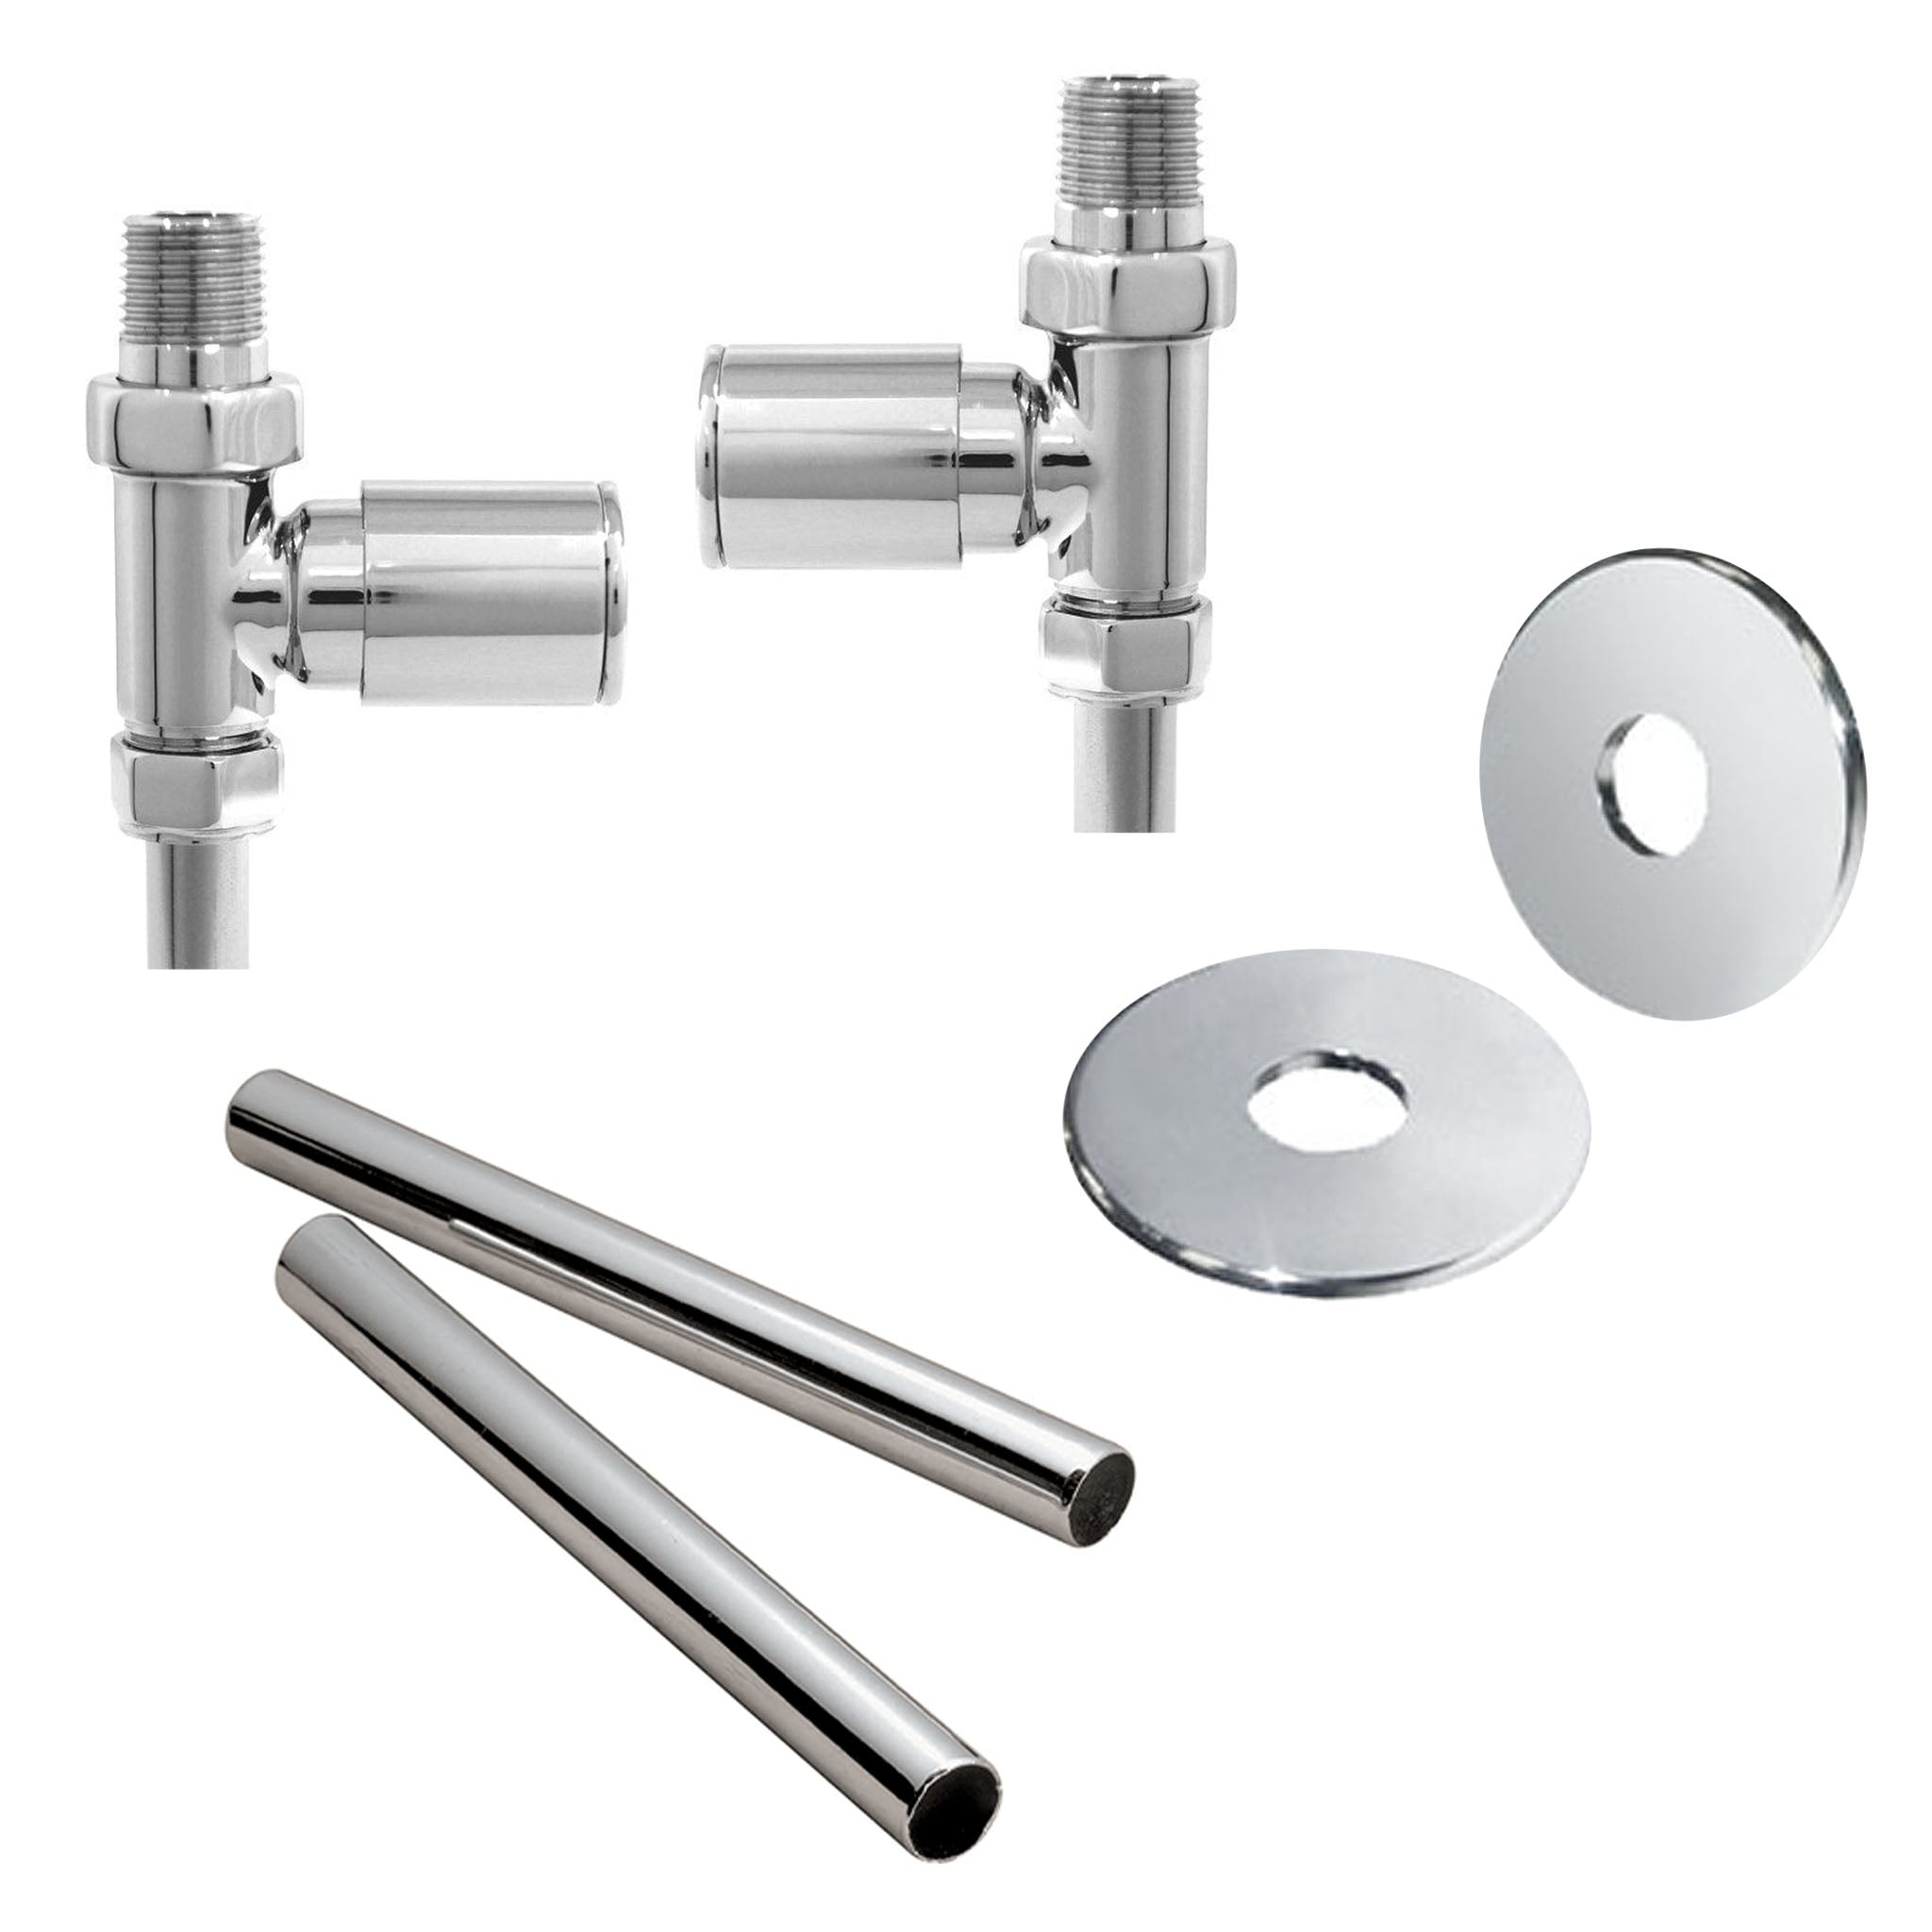 Vogue Arne Straight Valves With Cover Plate Fixing Kit